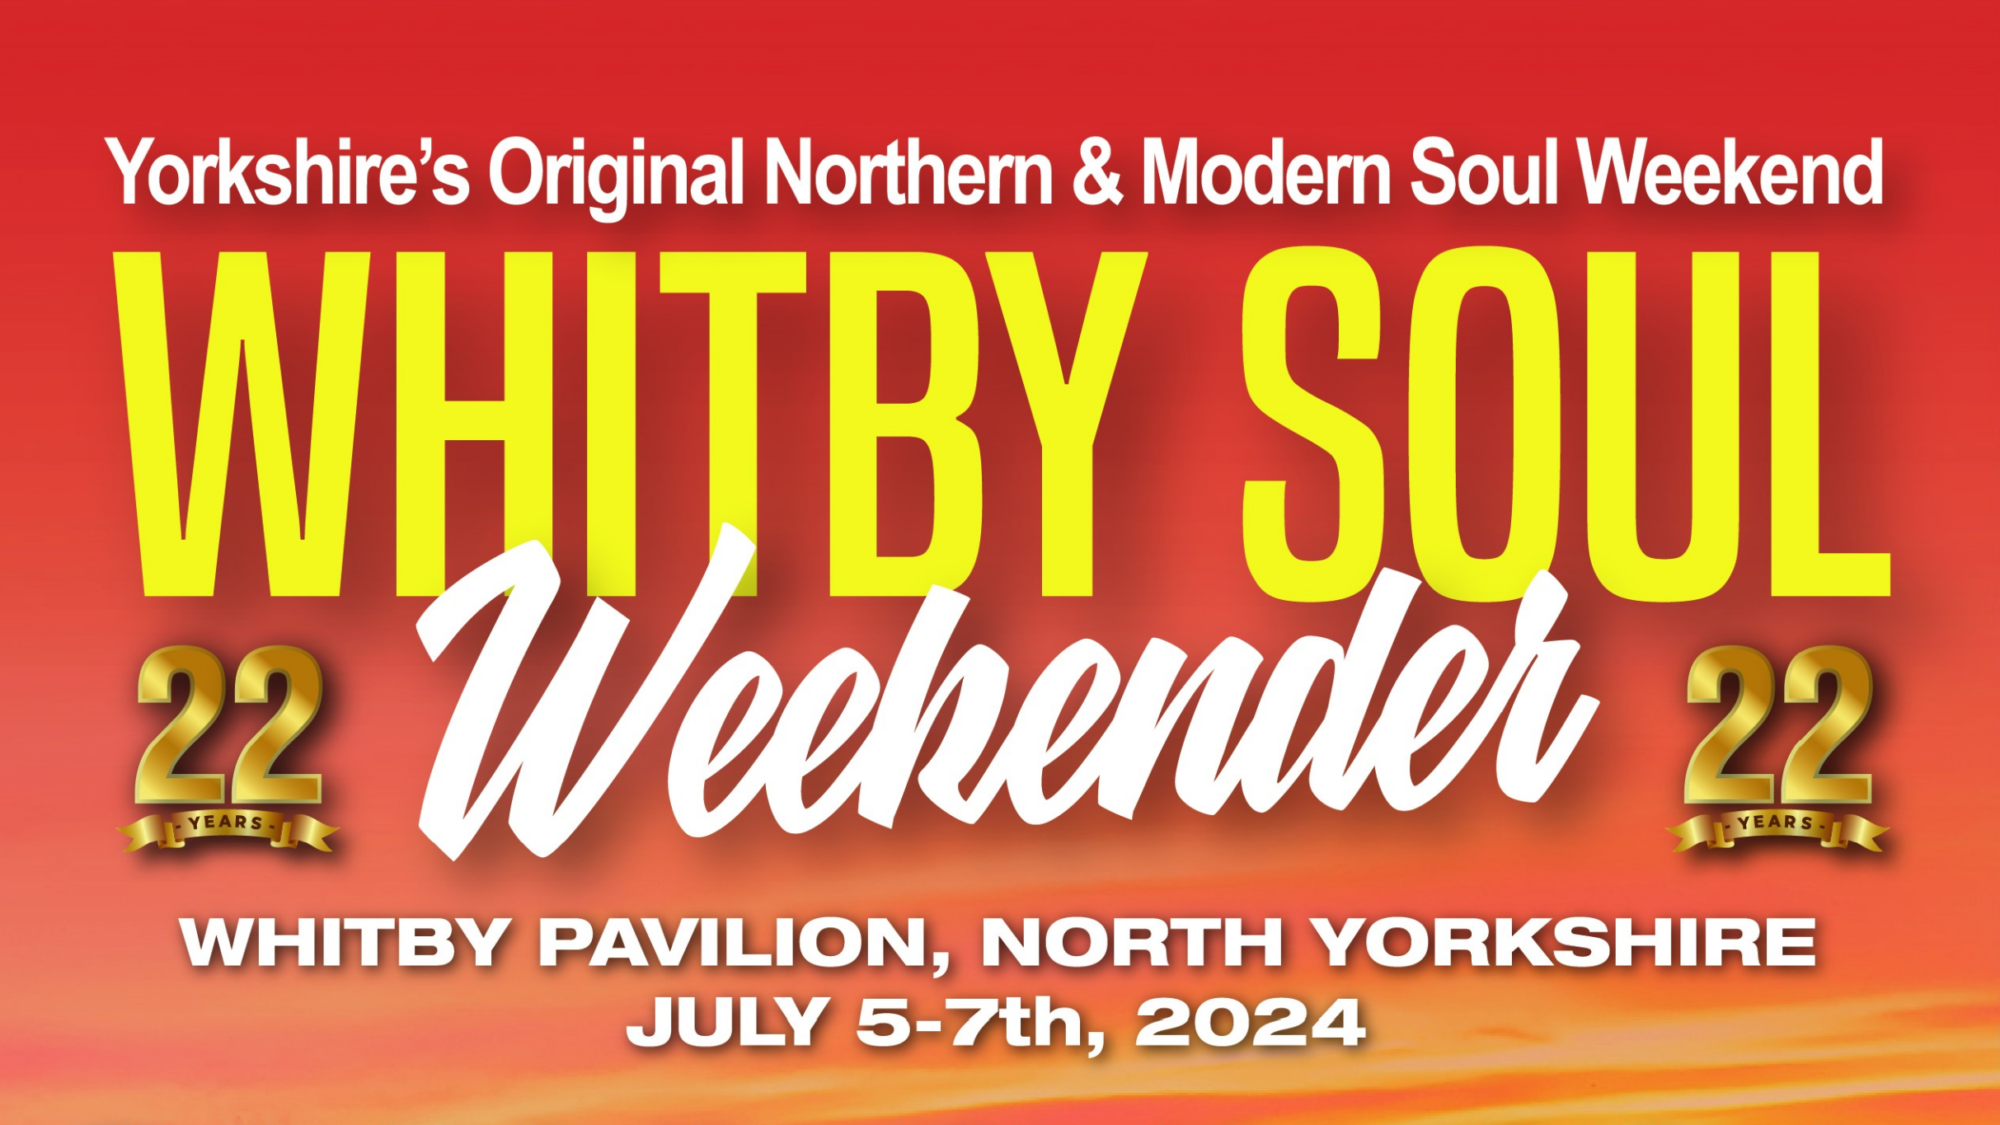 Image name Whitby Soul Weekender Full Weekend at Whitby Pavilion Northern Lights Suite Whitby the 15 image from the post Whitby Soul Weekender (Full Weekend) at Whitby Pavilion Northern Lights Suite, Whitby in Yorkshire.com.